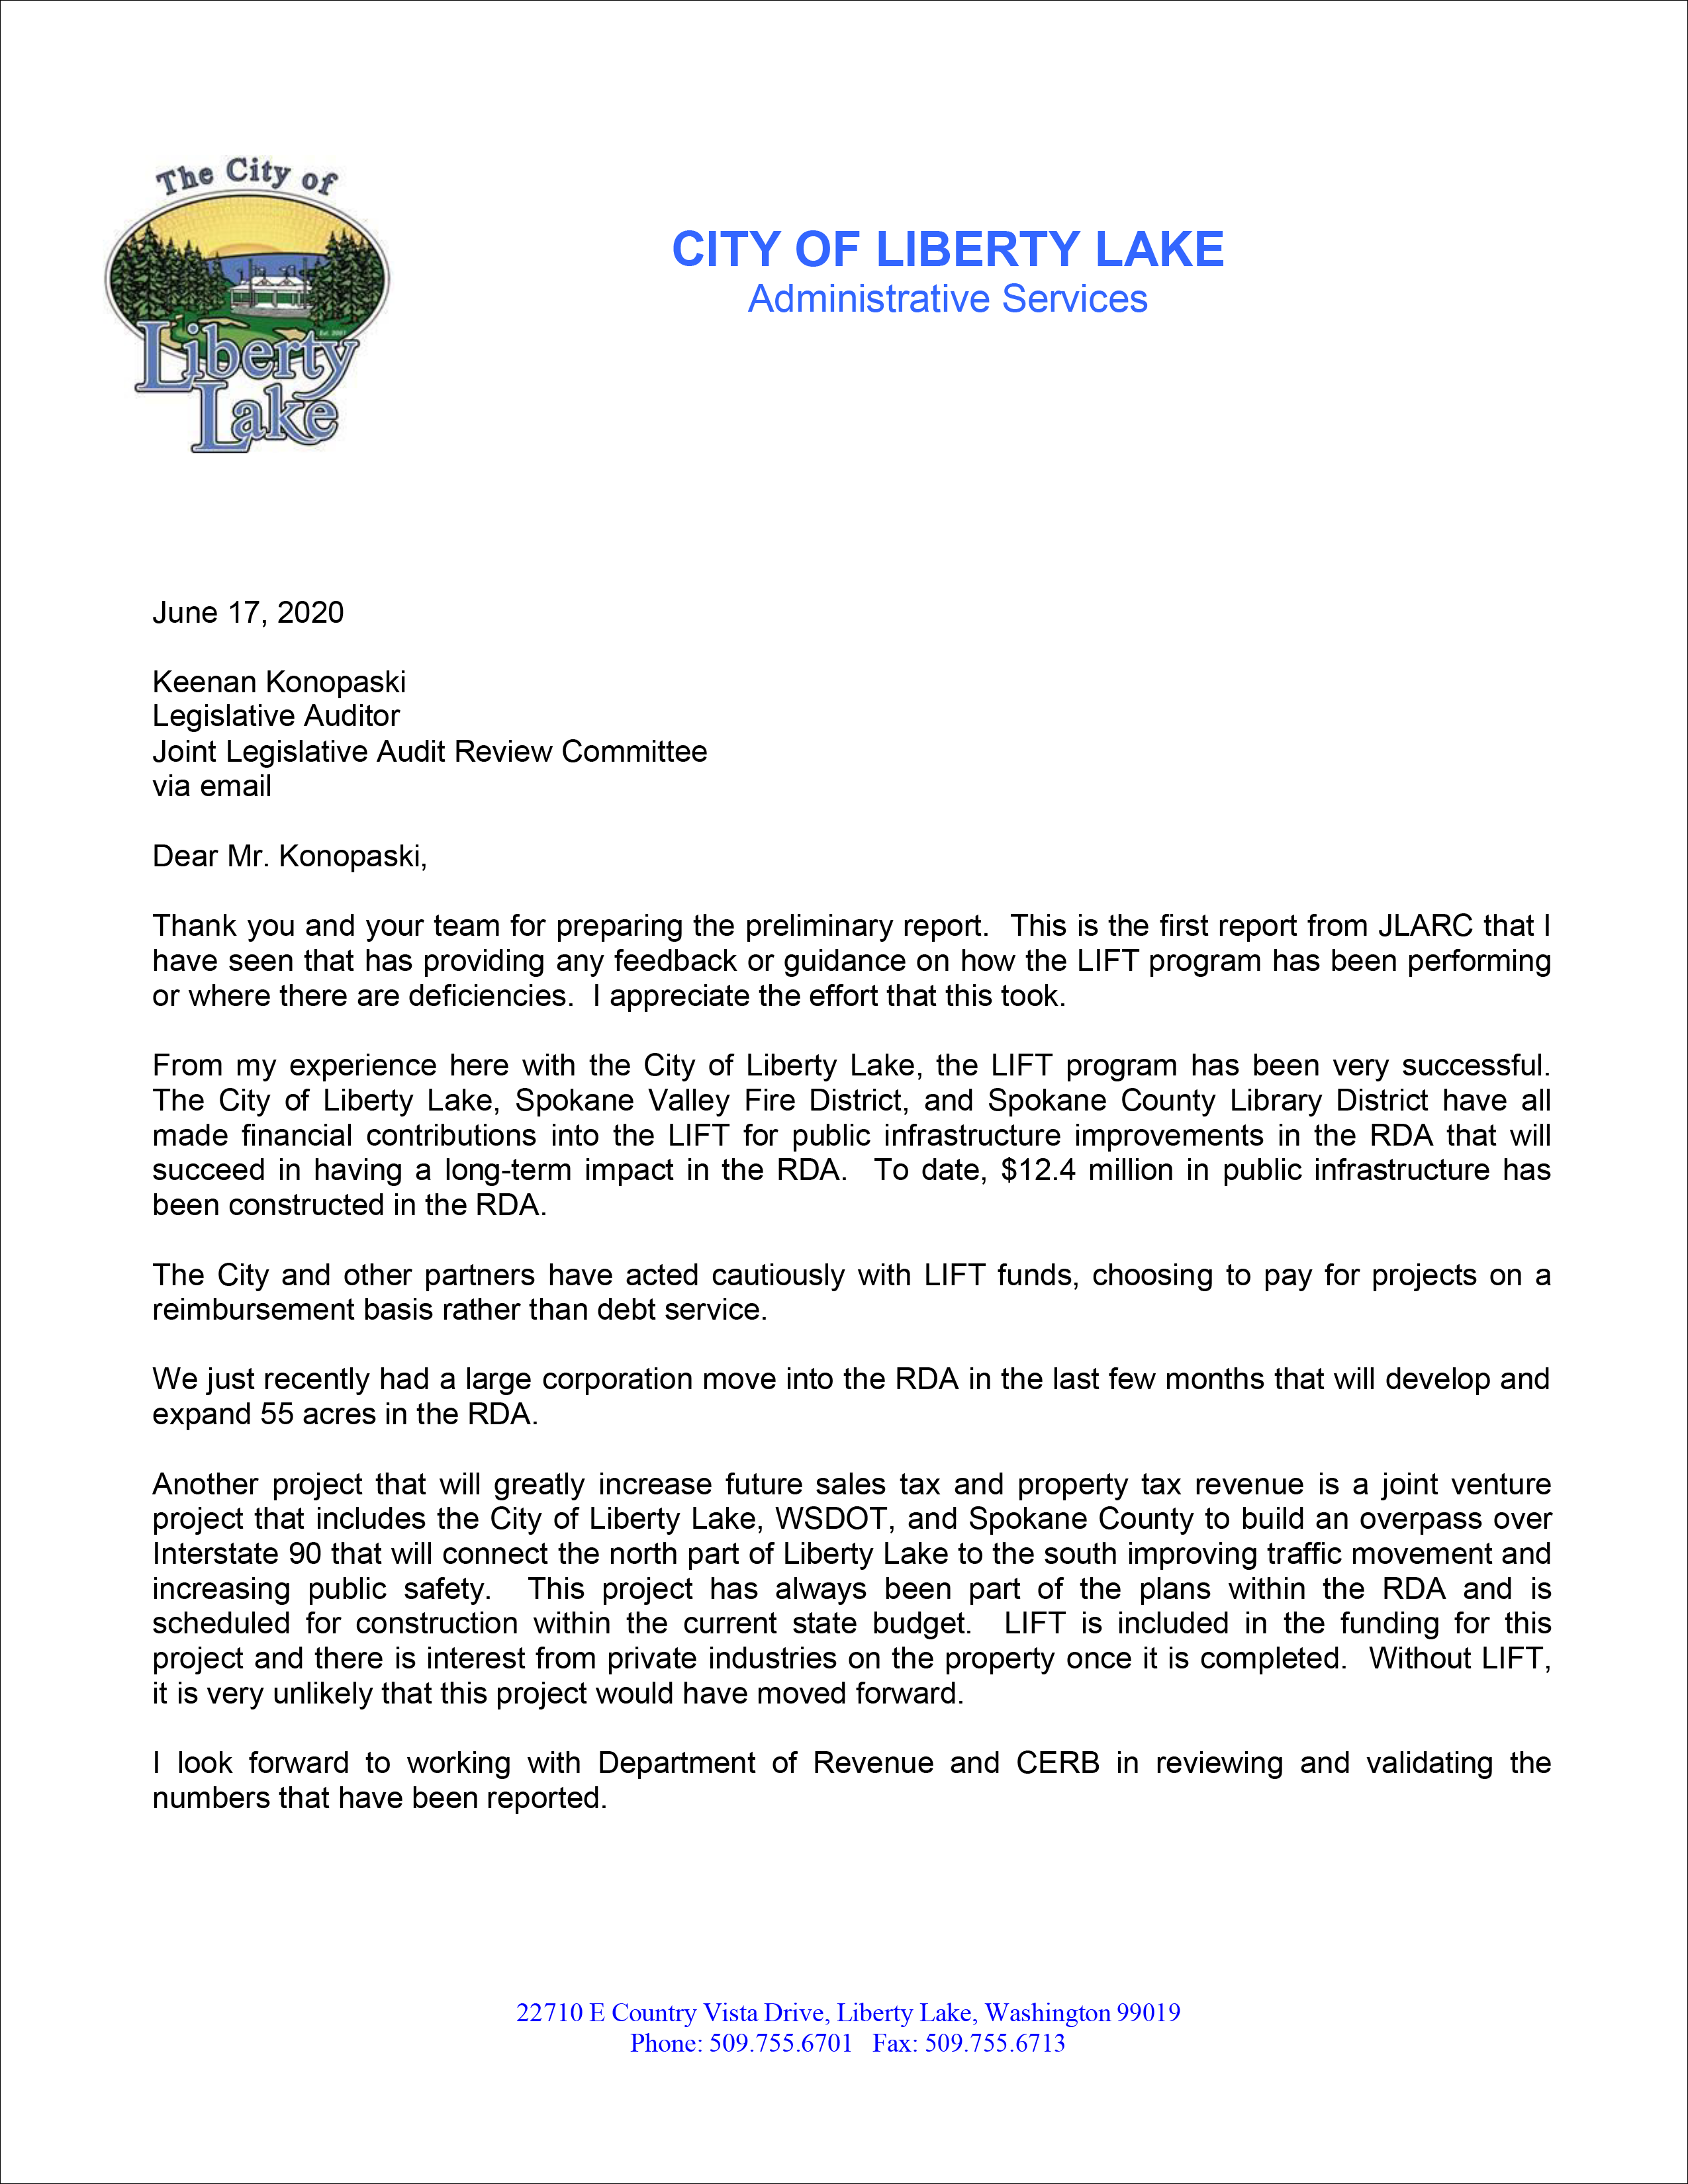 Page one of the City of Liberty Lake's response